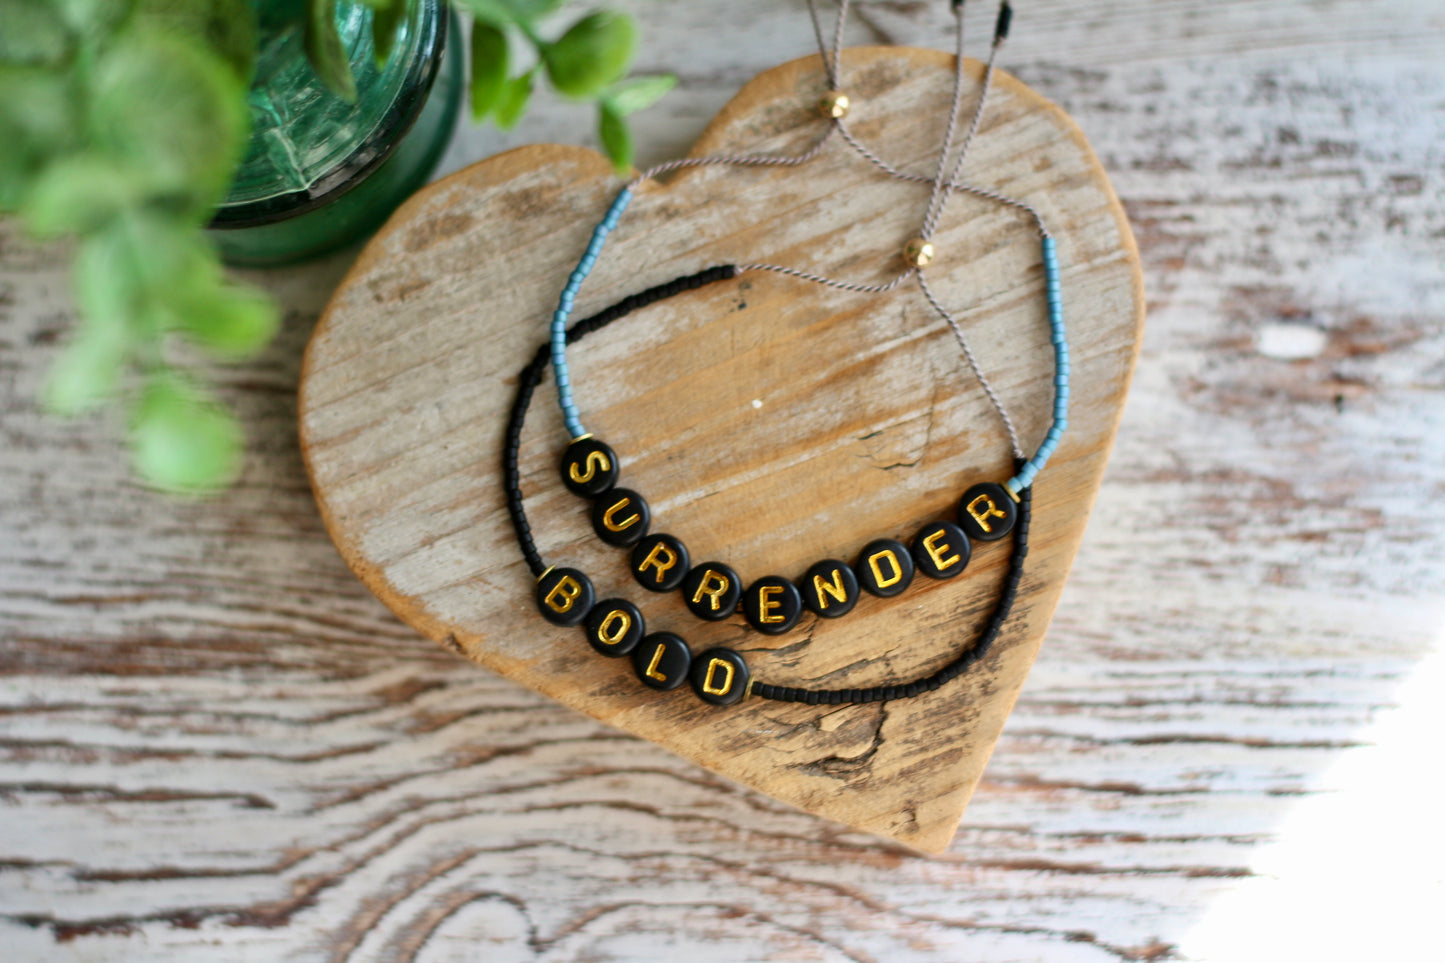 WORD dainty silk cord adjustable beaded bracelet (black with gold letters)